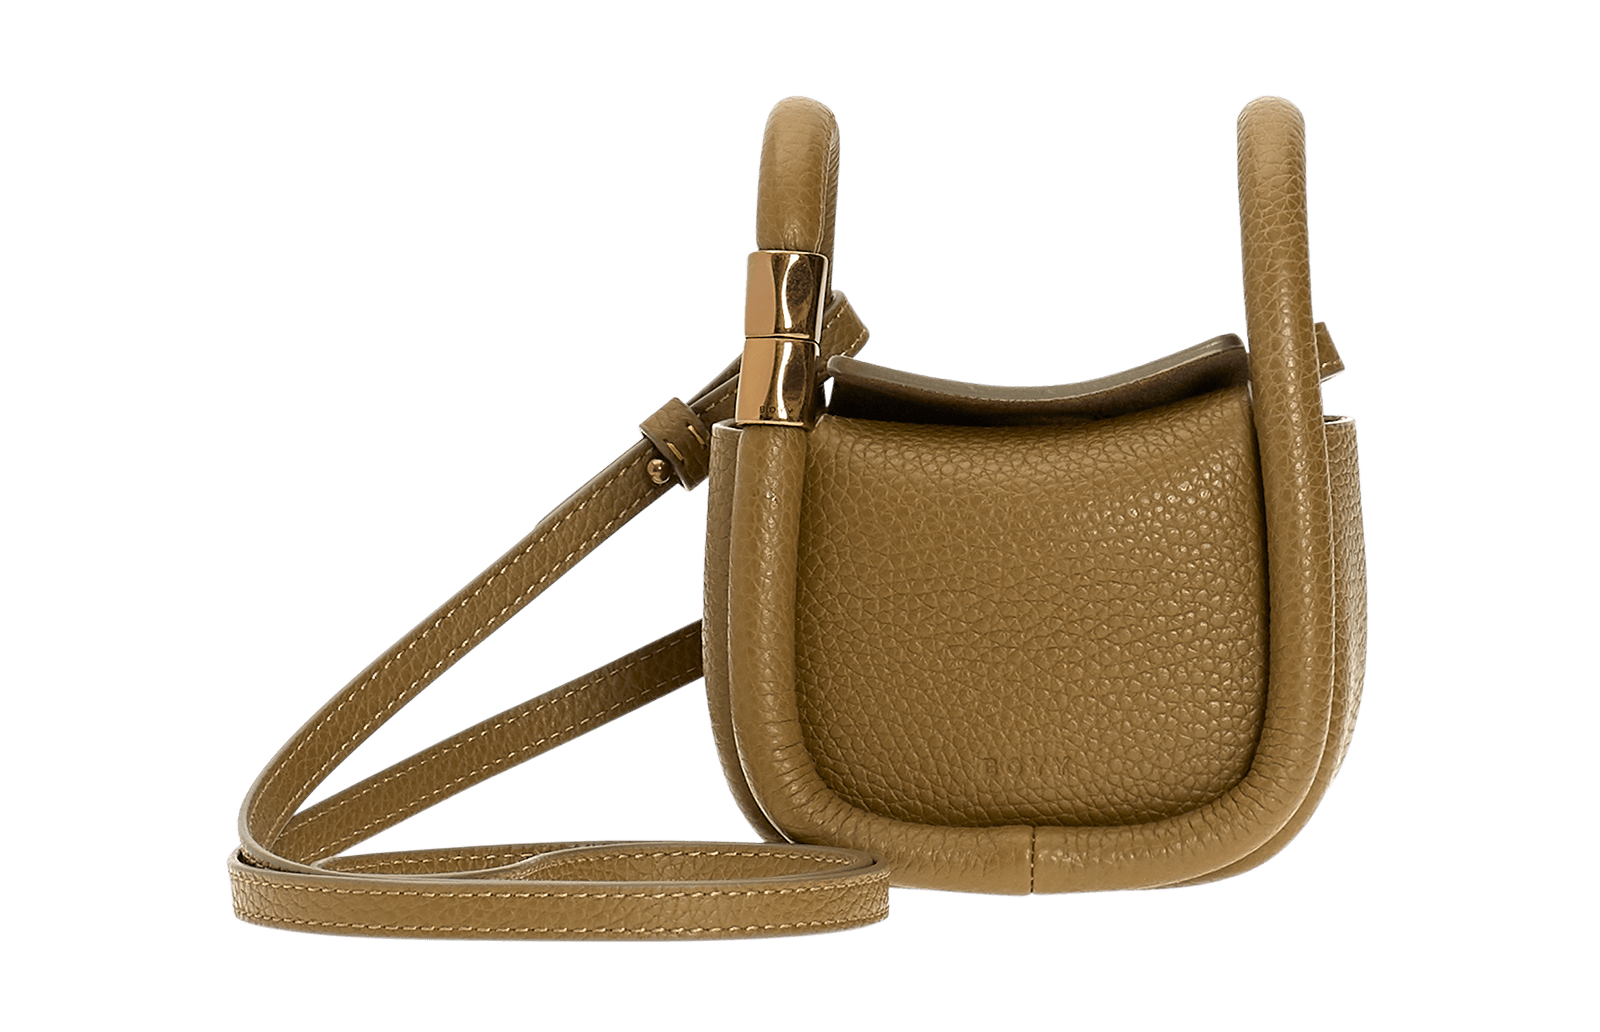 Extra small, mini brown bag with oversized edge piping, shoulder strap, and linkable double handles. Made with pebble calfskin leather.